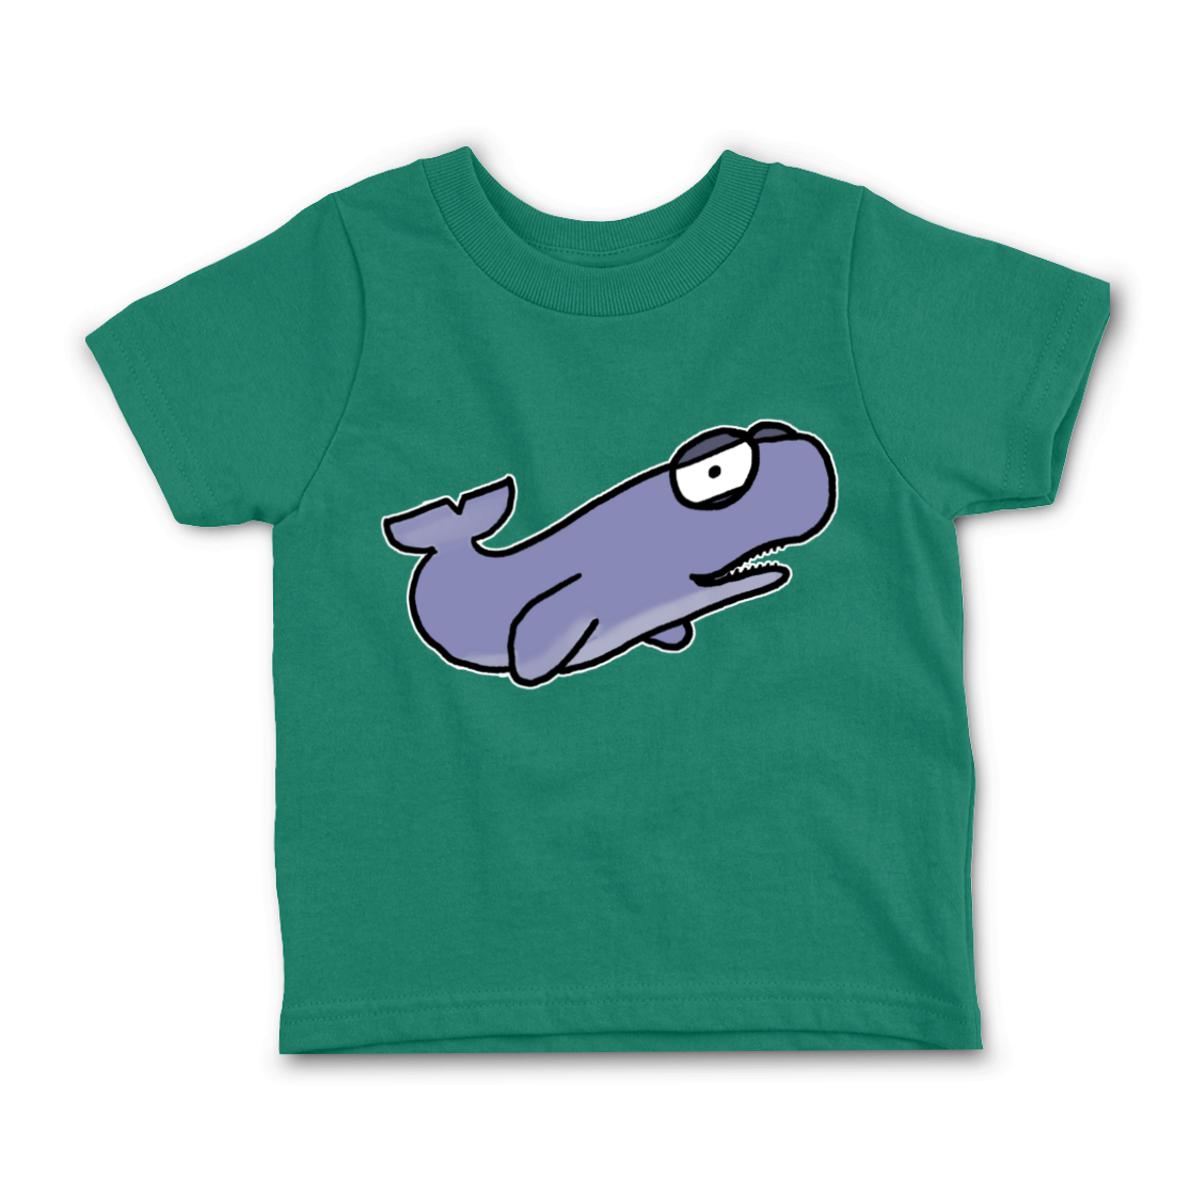 Sperm Whale Toddler Tee 56T kelly